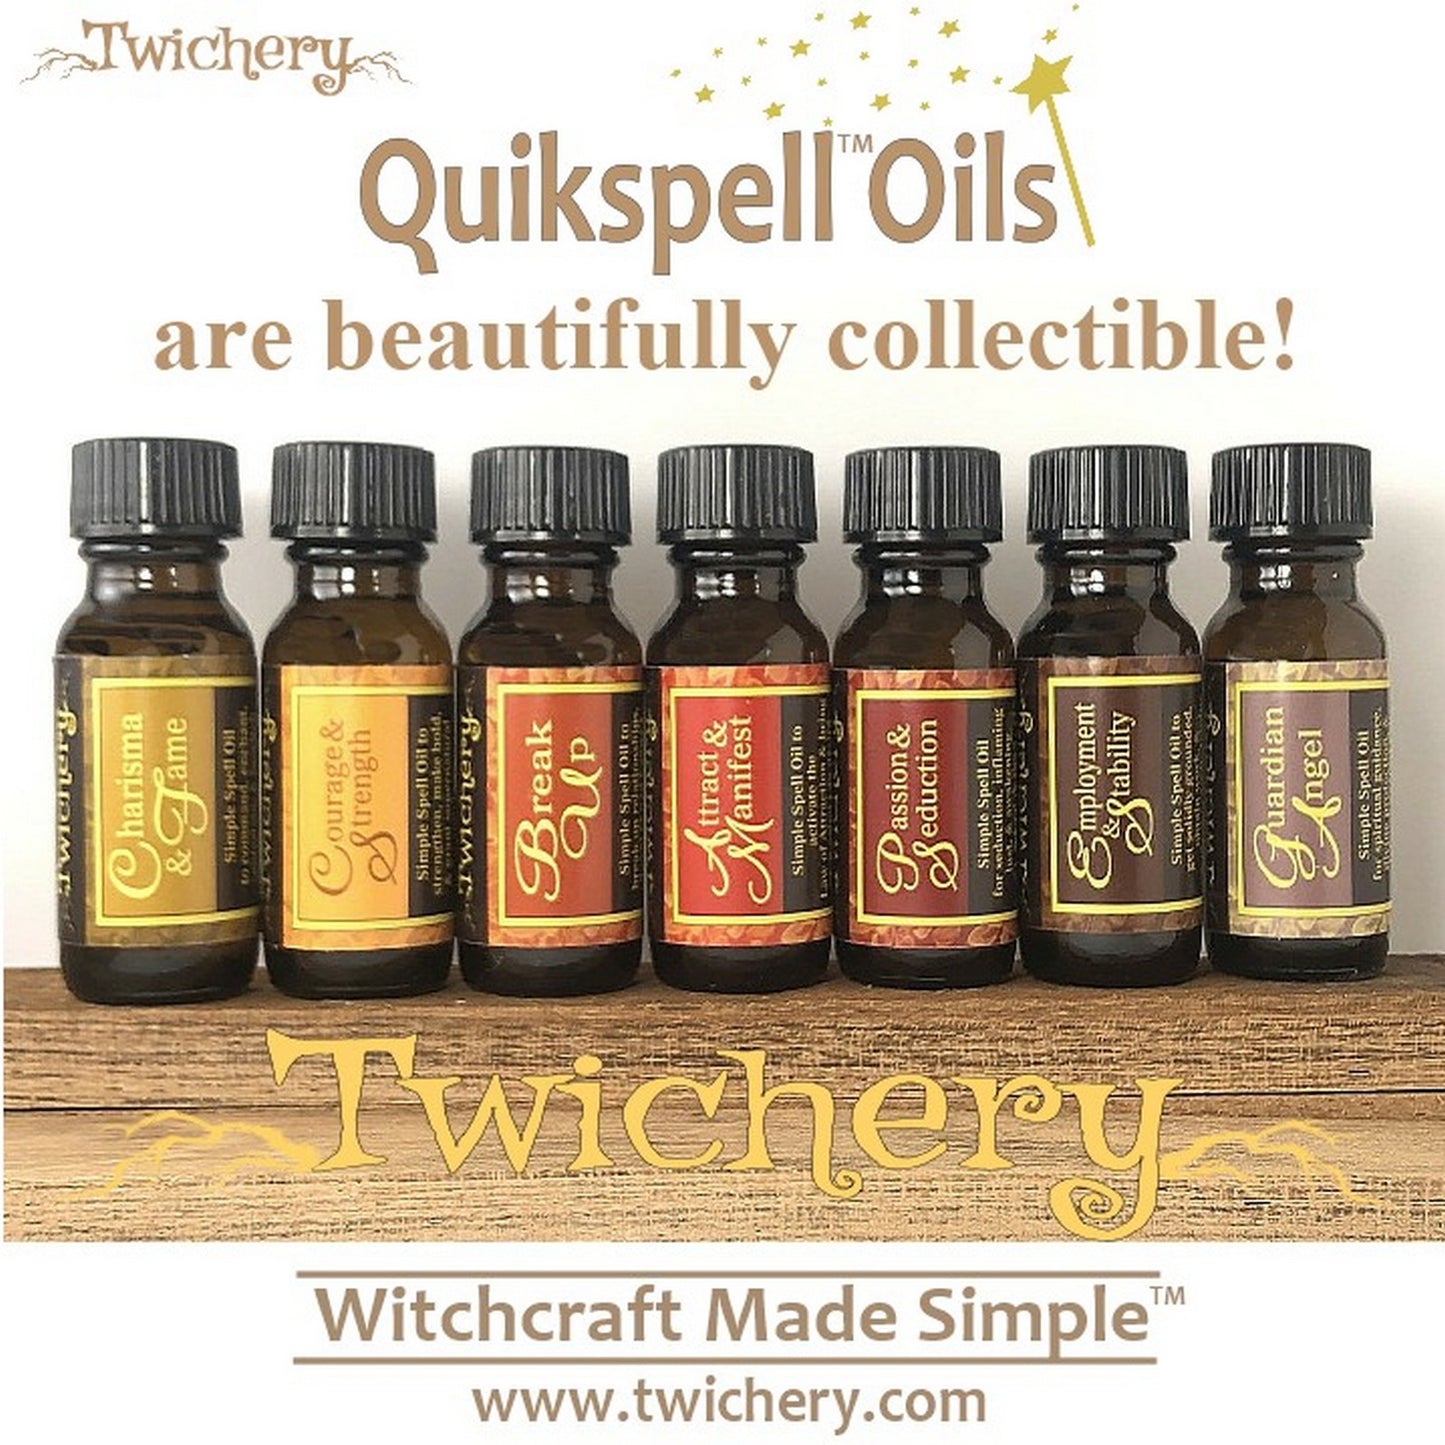 Collect all 24 Twichery Quikspell Oils for all your magickal needs, including our Quikspell Charisma & Fame Blend! Hoodoo, Voodoo, Wicca, Witchcraft Made Simple